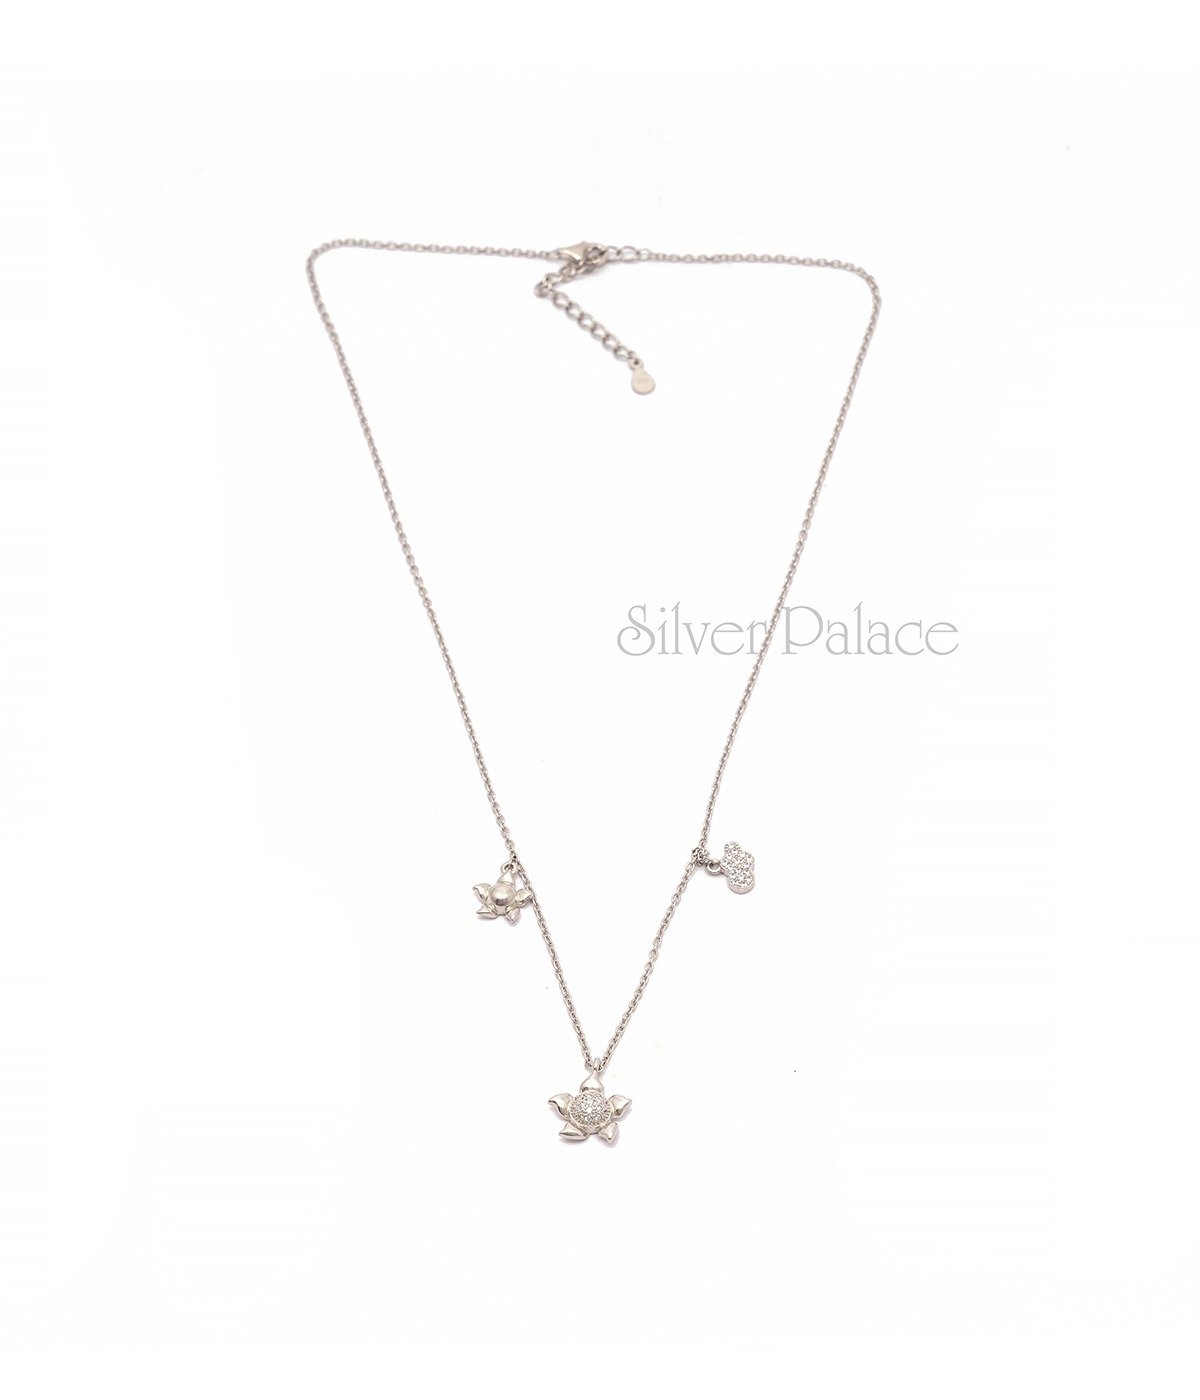 92.5 STERLING SILVER THREE FLOWER CHARM PENDANT CHAIN